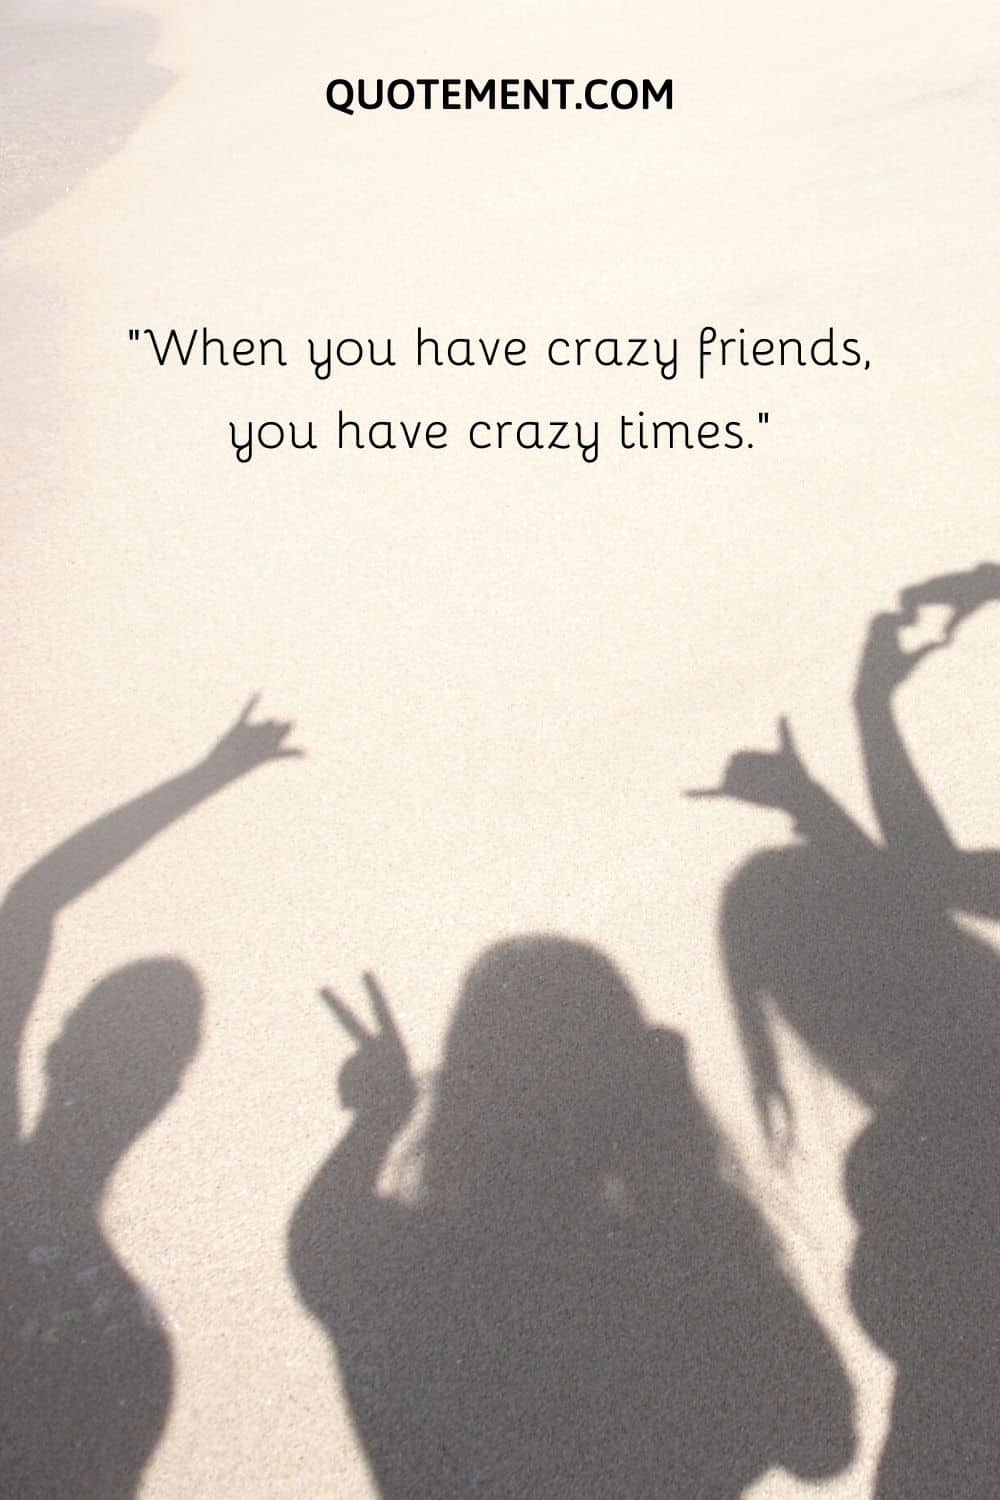 When you have crazy friends, you have crazy times